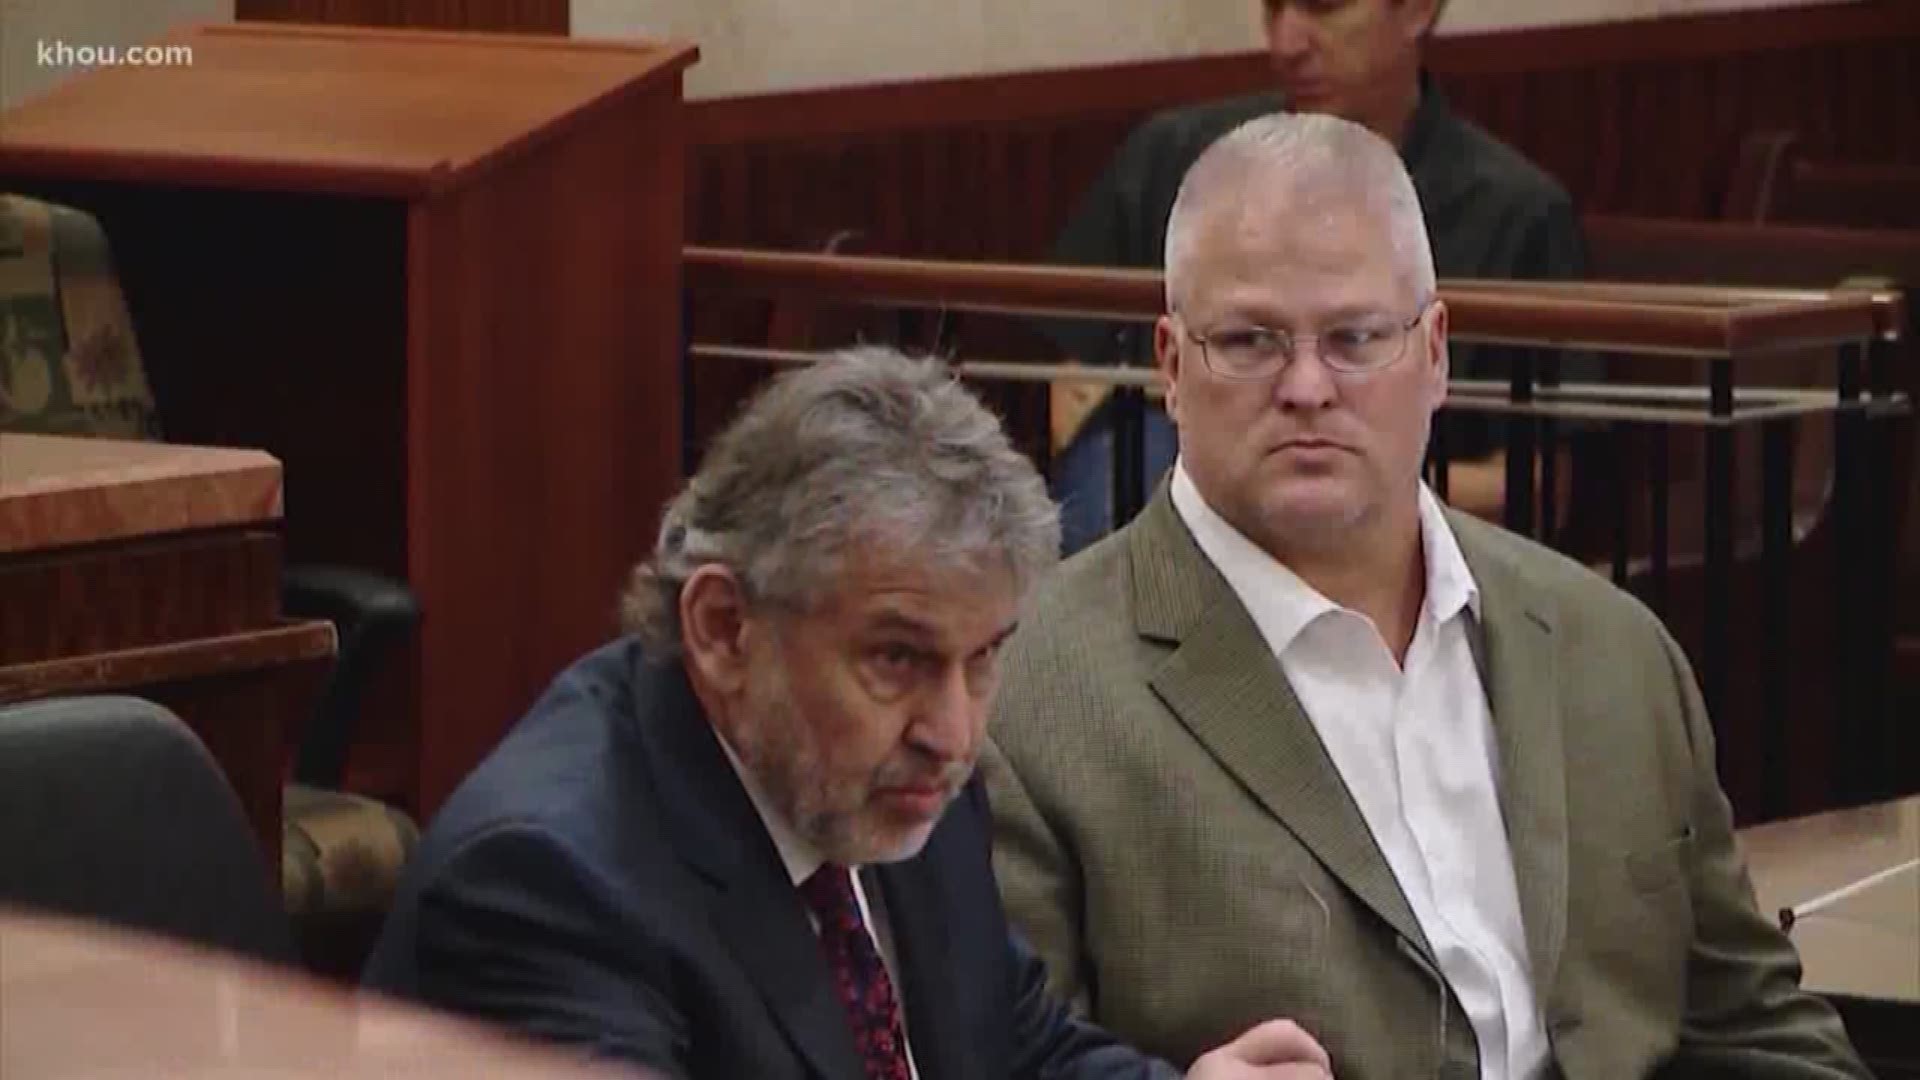 The State of Texas has filed a motion to change the venue for the sentencing phase in David Temple’s trial.